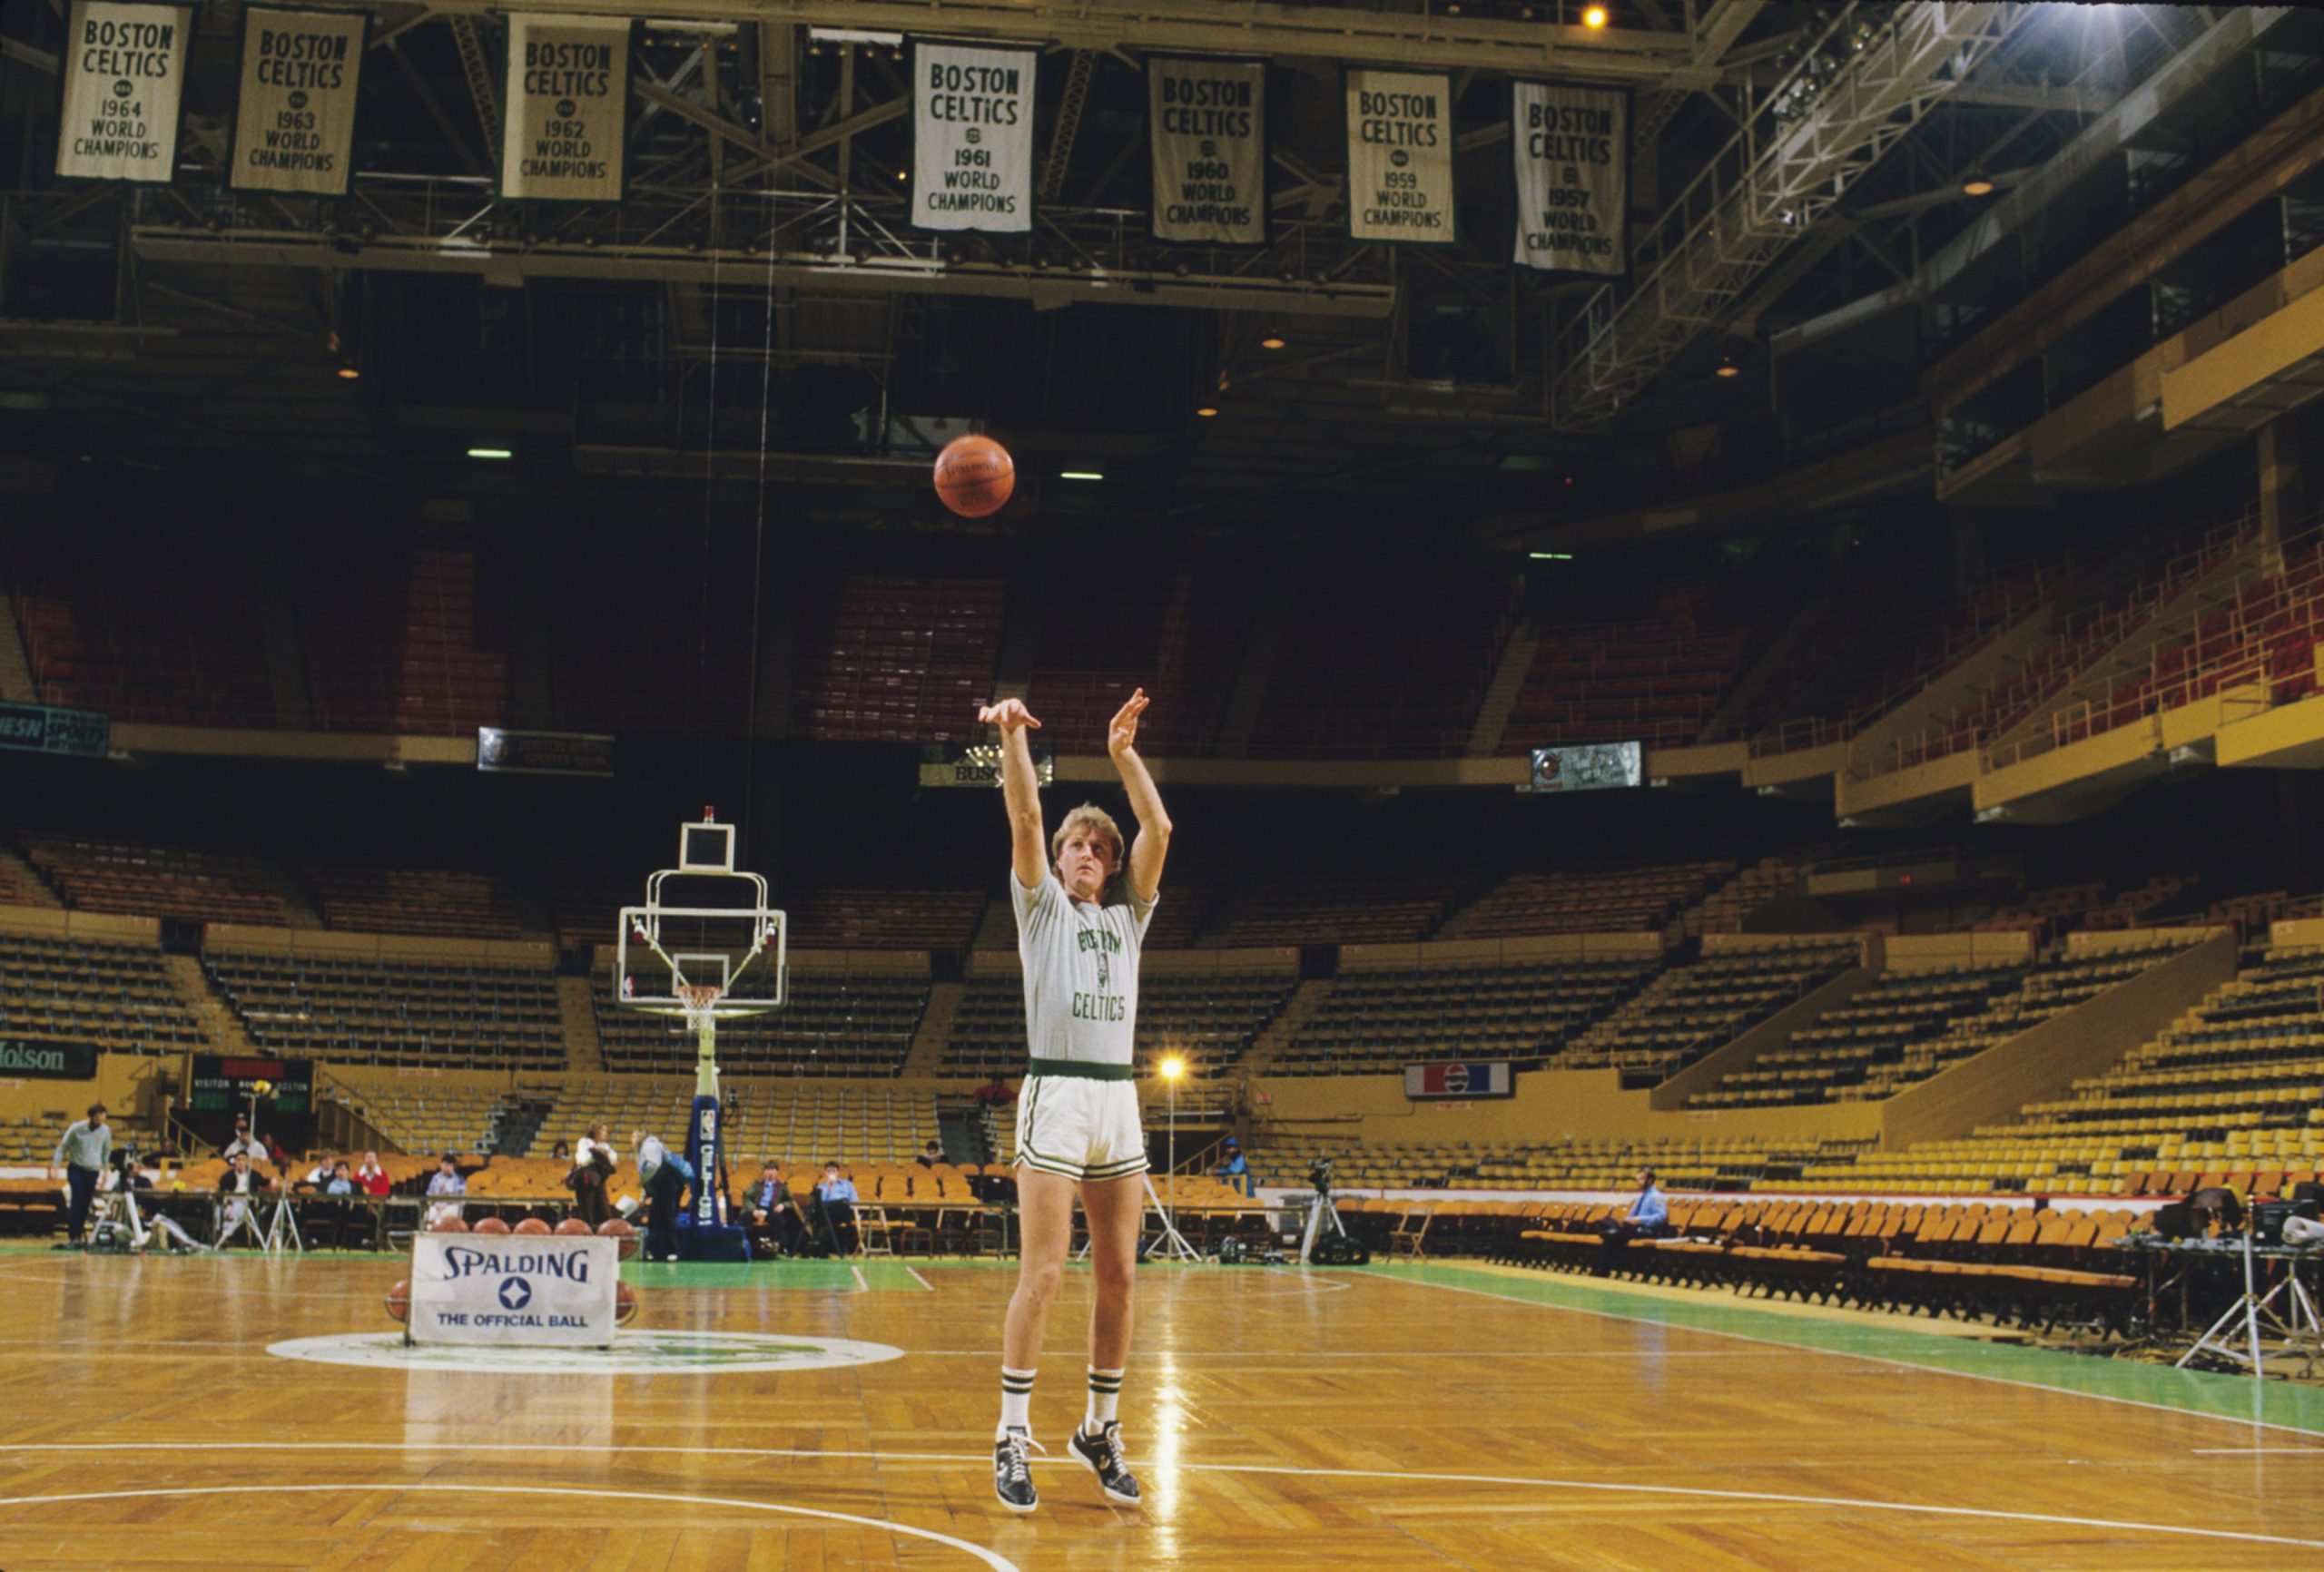 Larry Bird of the Boston Celtics practices before a game on January 22, 1986.